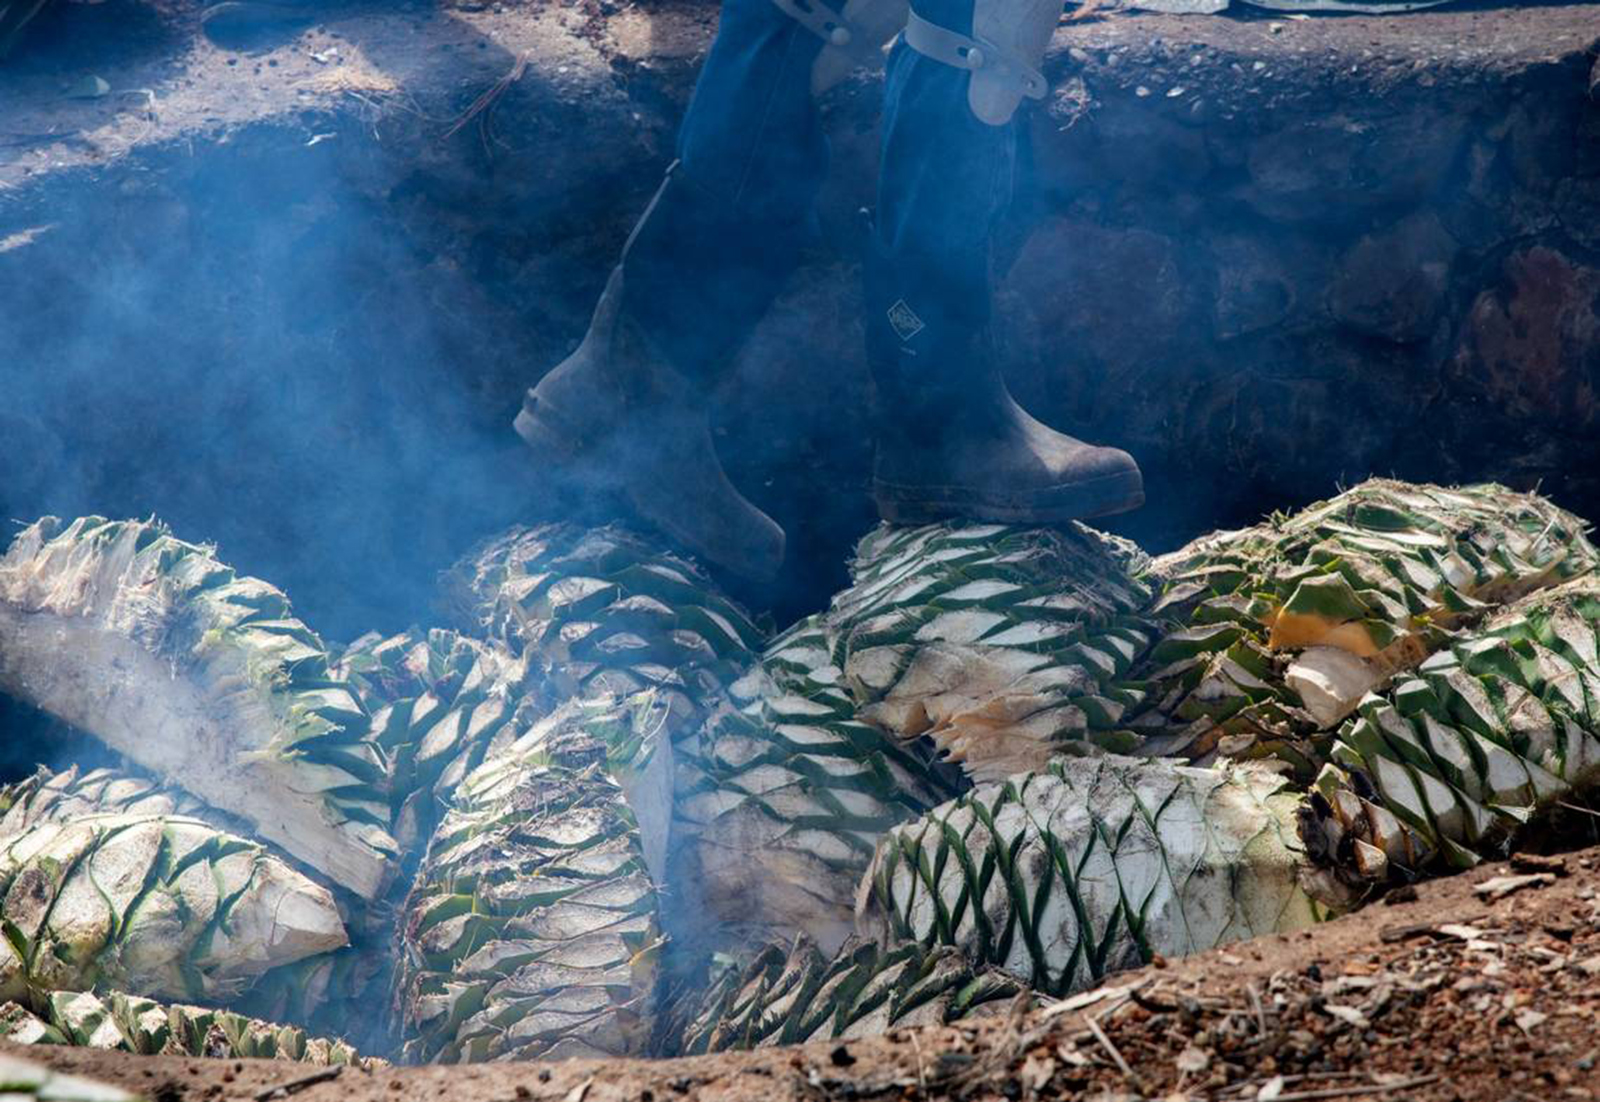 Agave bulbs are placed in a fire pit